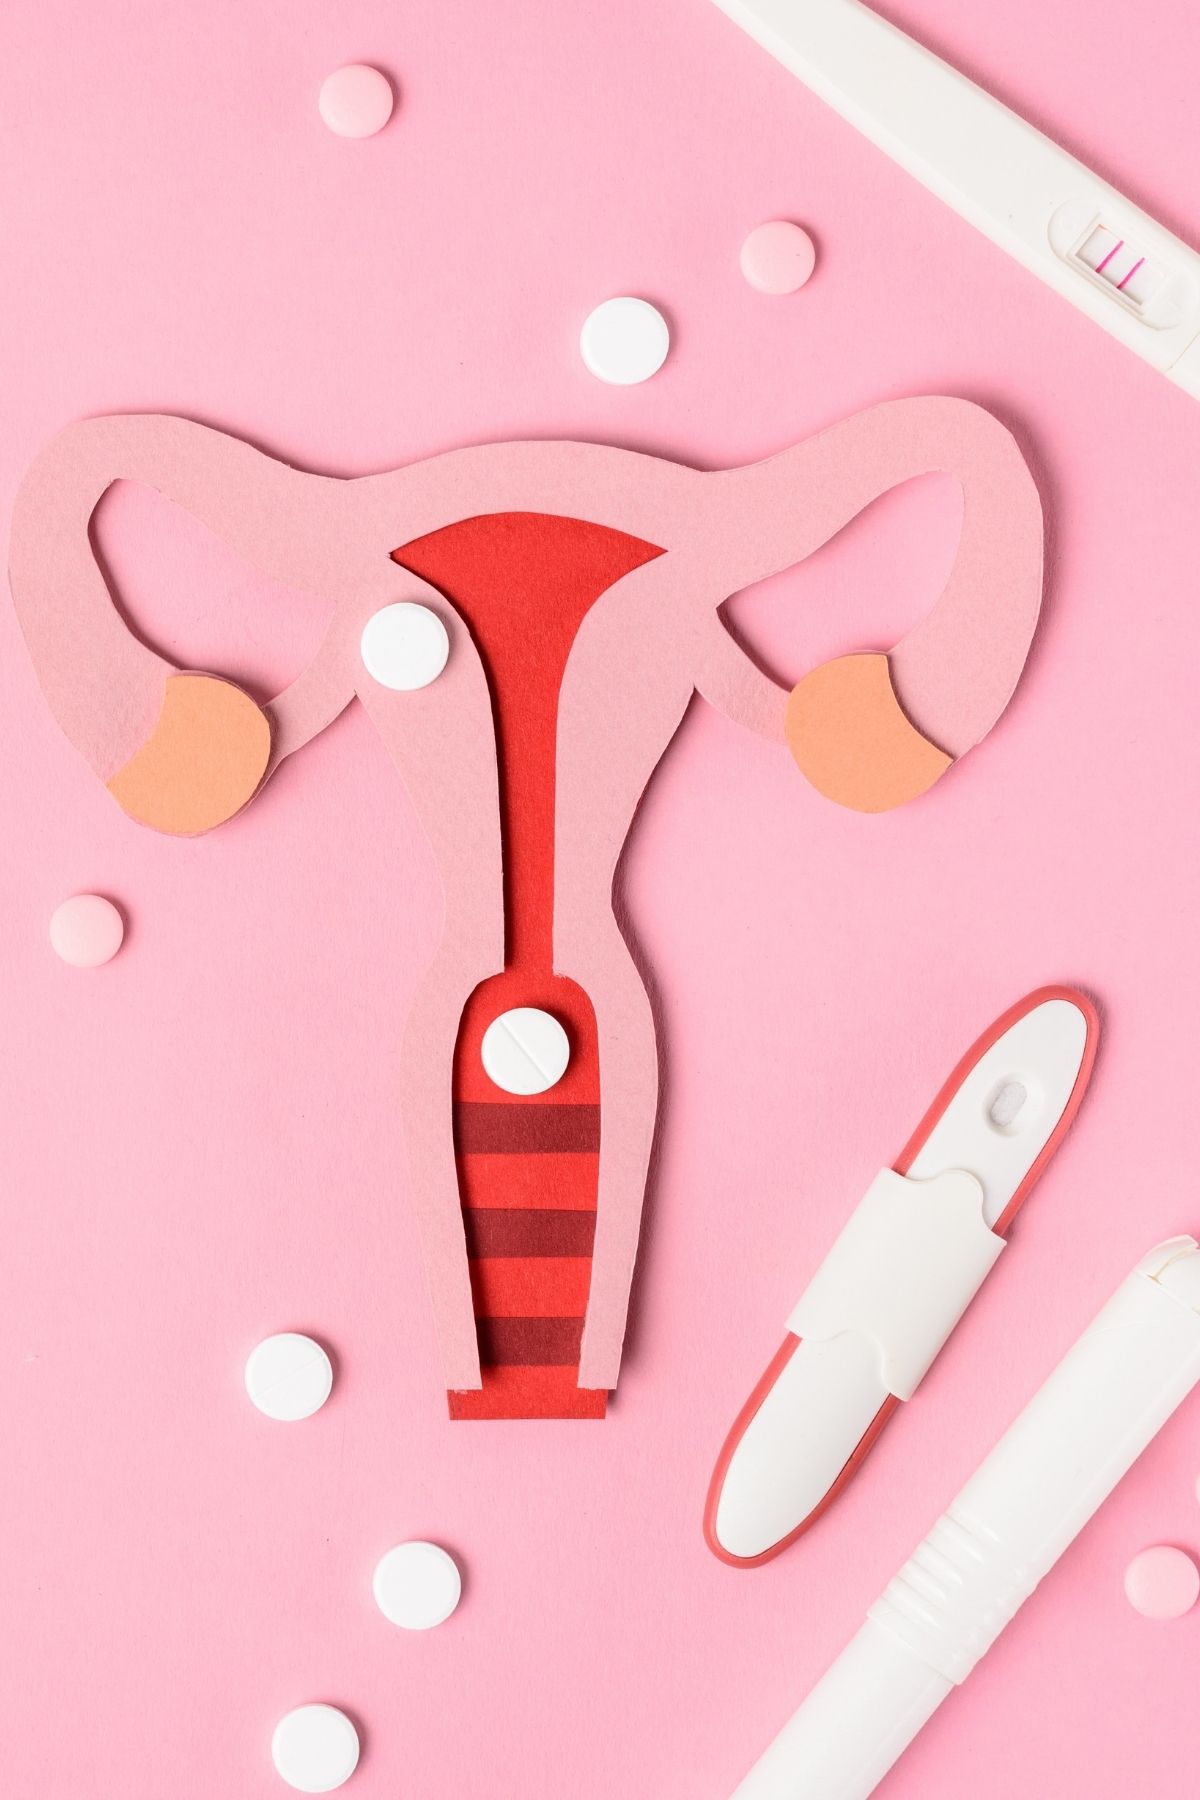 Diagram of uterus with implanted egg surrounded by several pregnancy tests on pink background.